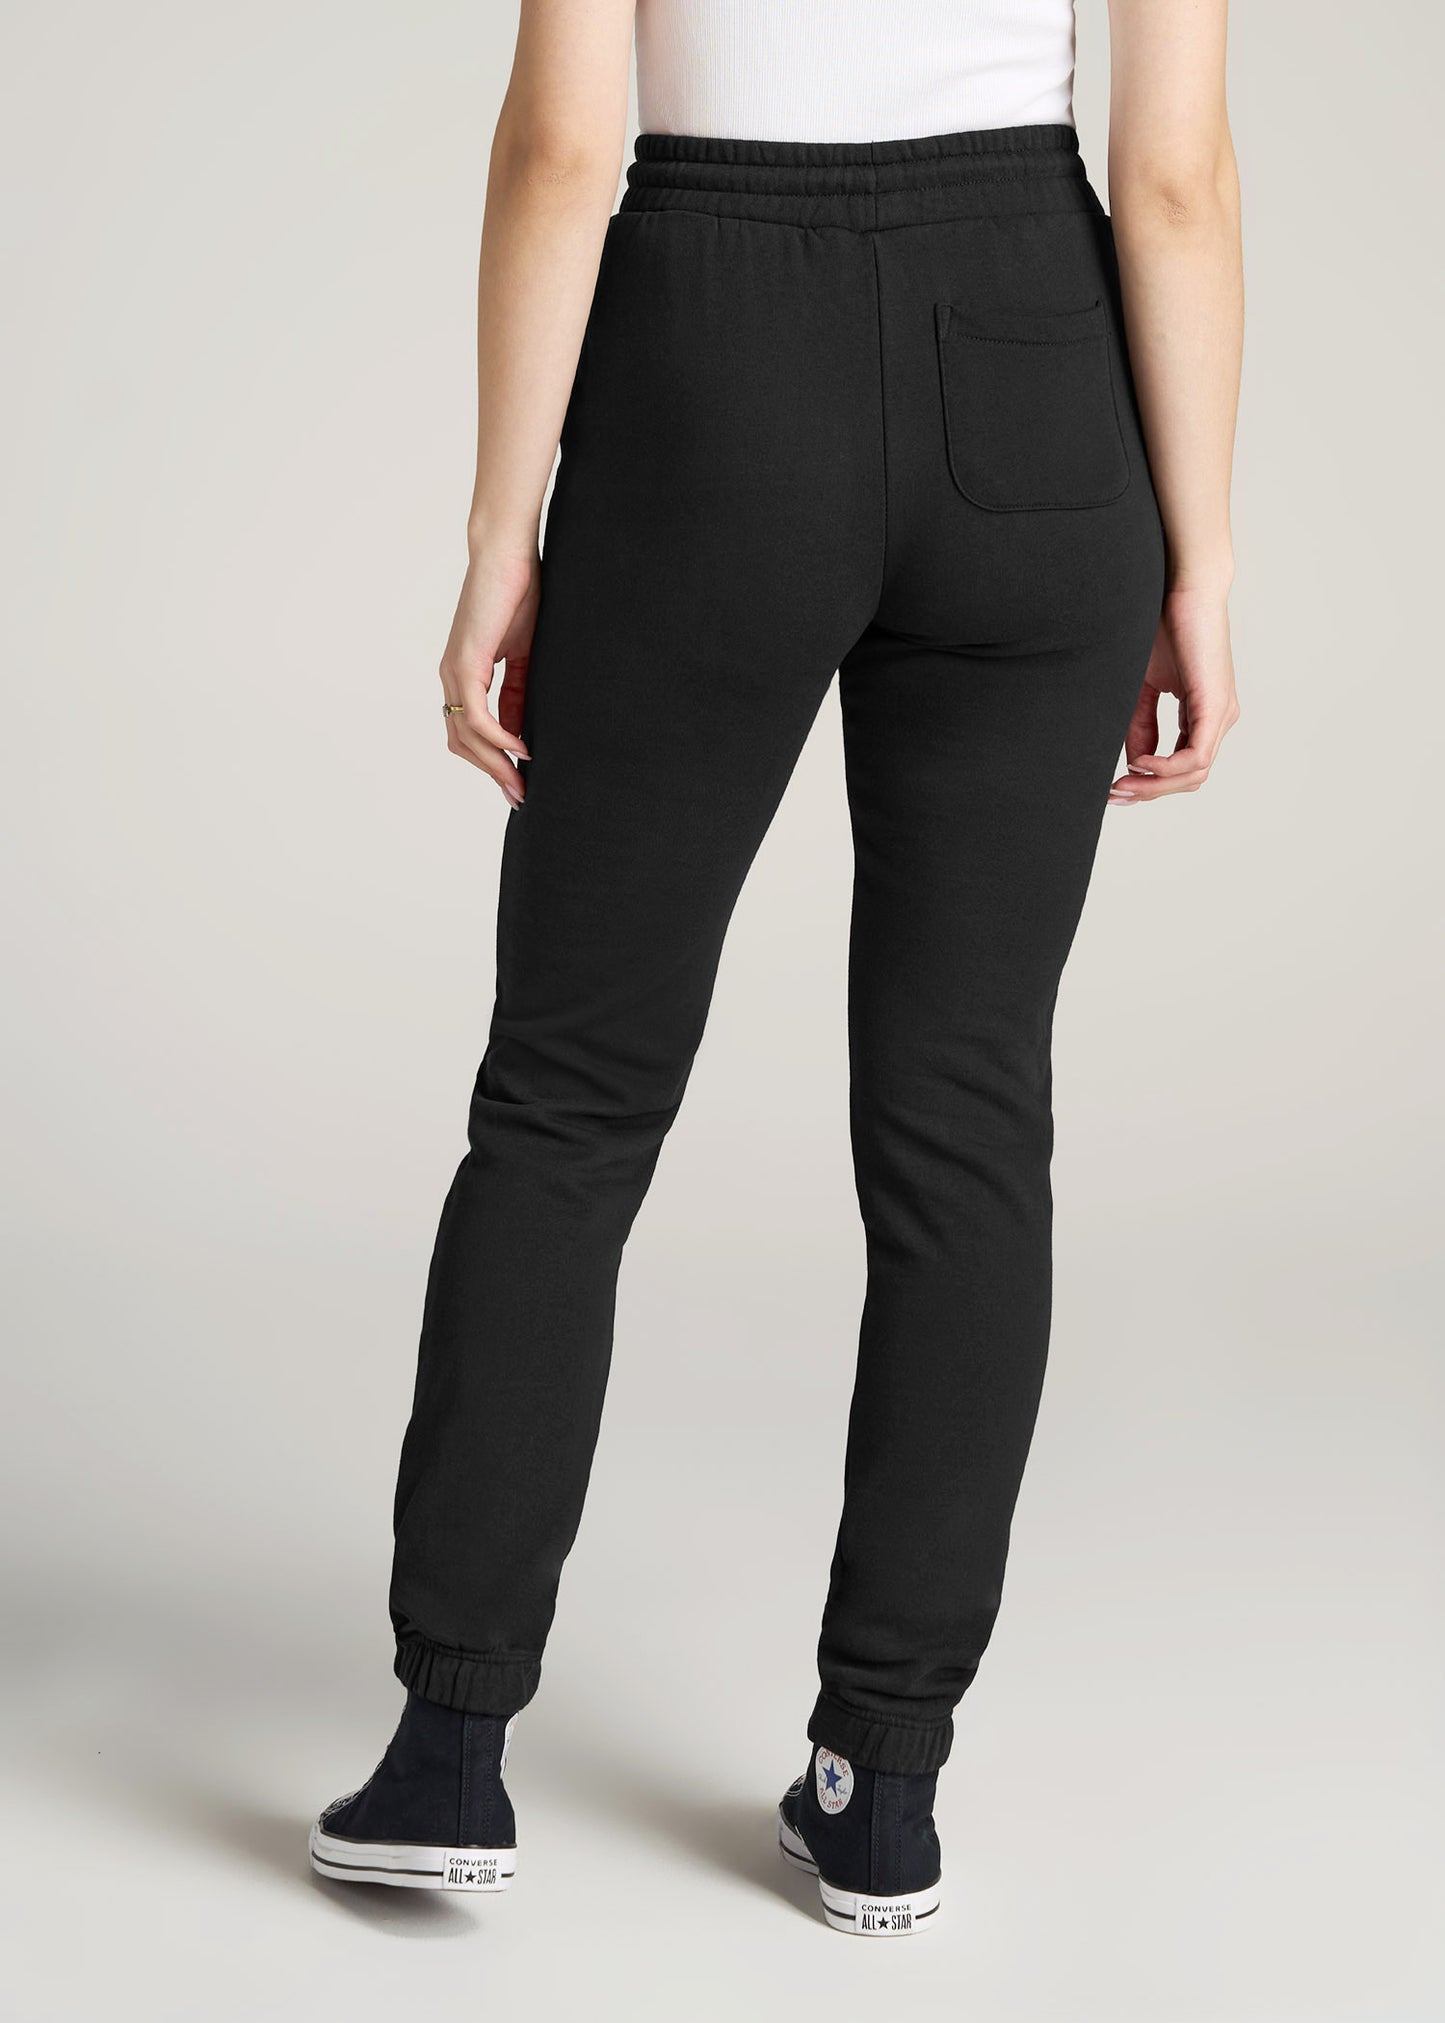 Converse Leggings With Pockets In Black